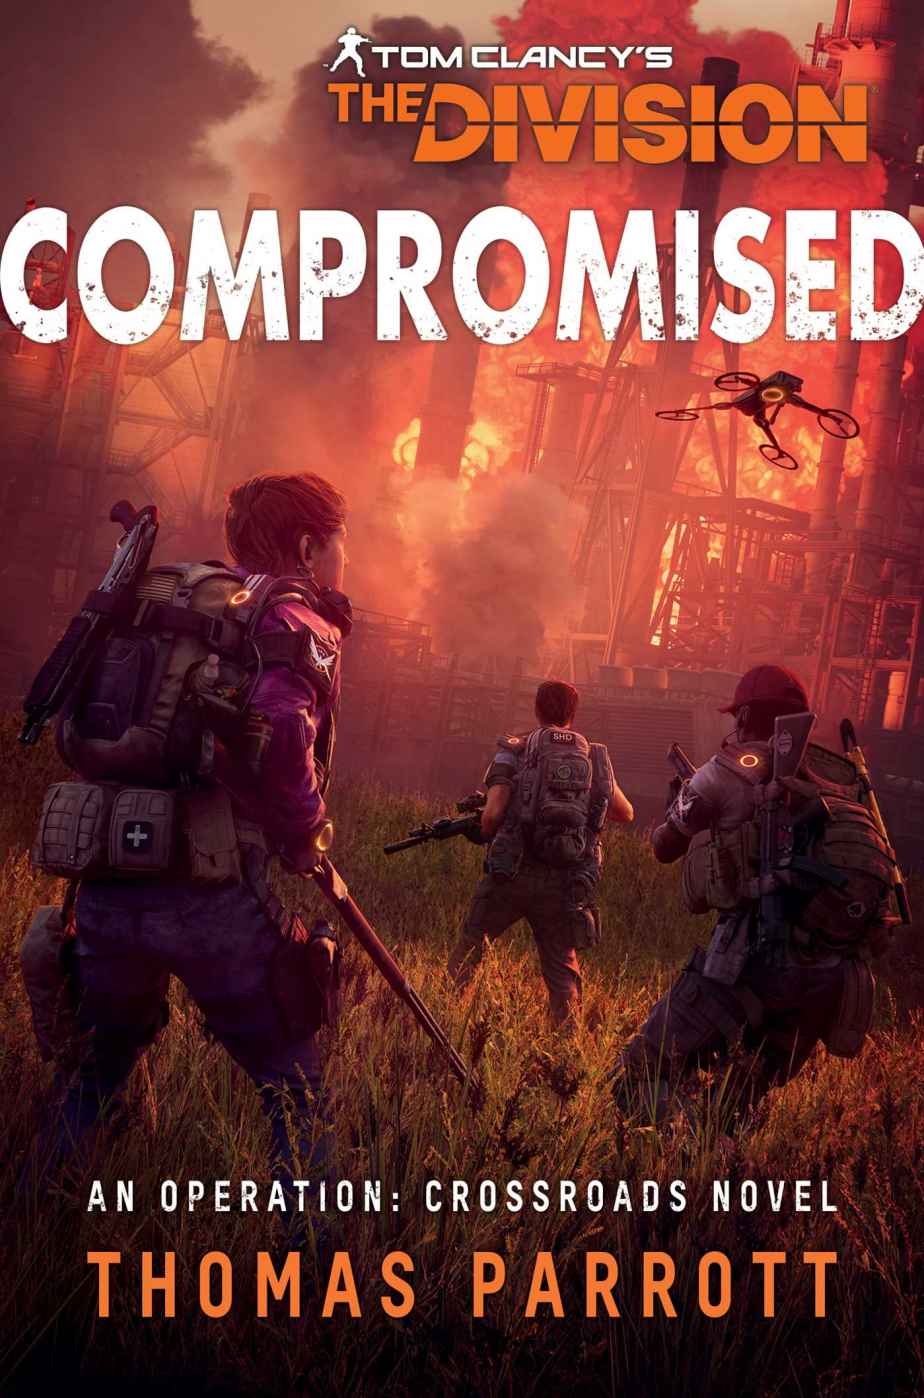 Tom Clancy's The Division: Compromised: An Operation: Crossroads Novel (Tom Clancy’s The Division)